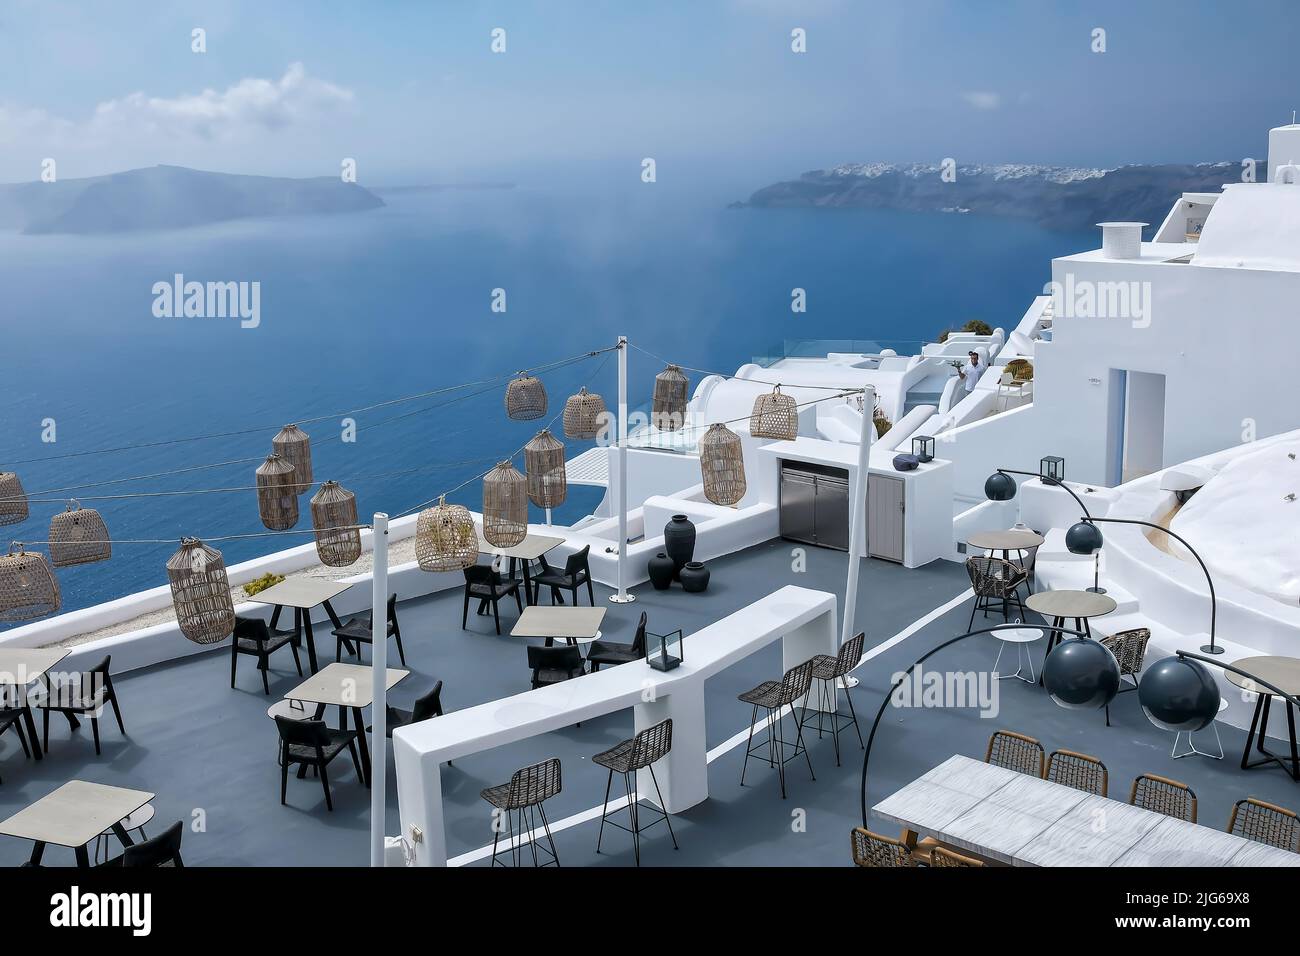 Santorini, Greece - May 13, 2021 :  View of a picturesque terrace decorated with tables, chairs  and lights overlooking  the Aegean Sea on a sunny day Stock Photo